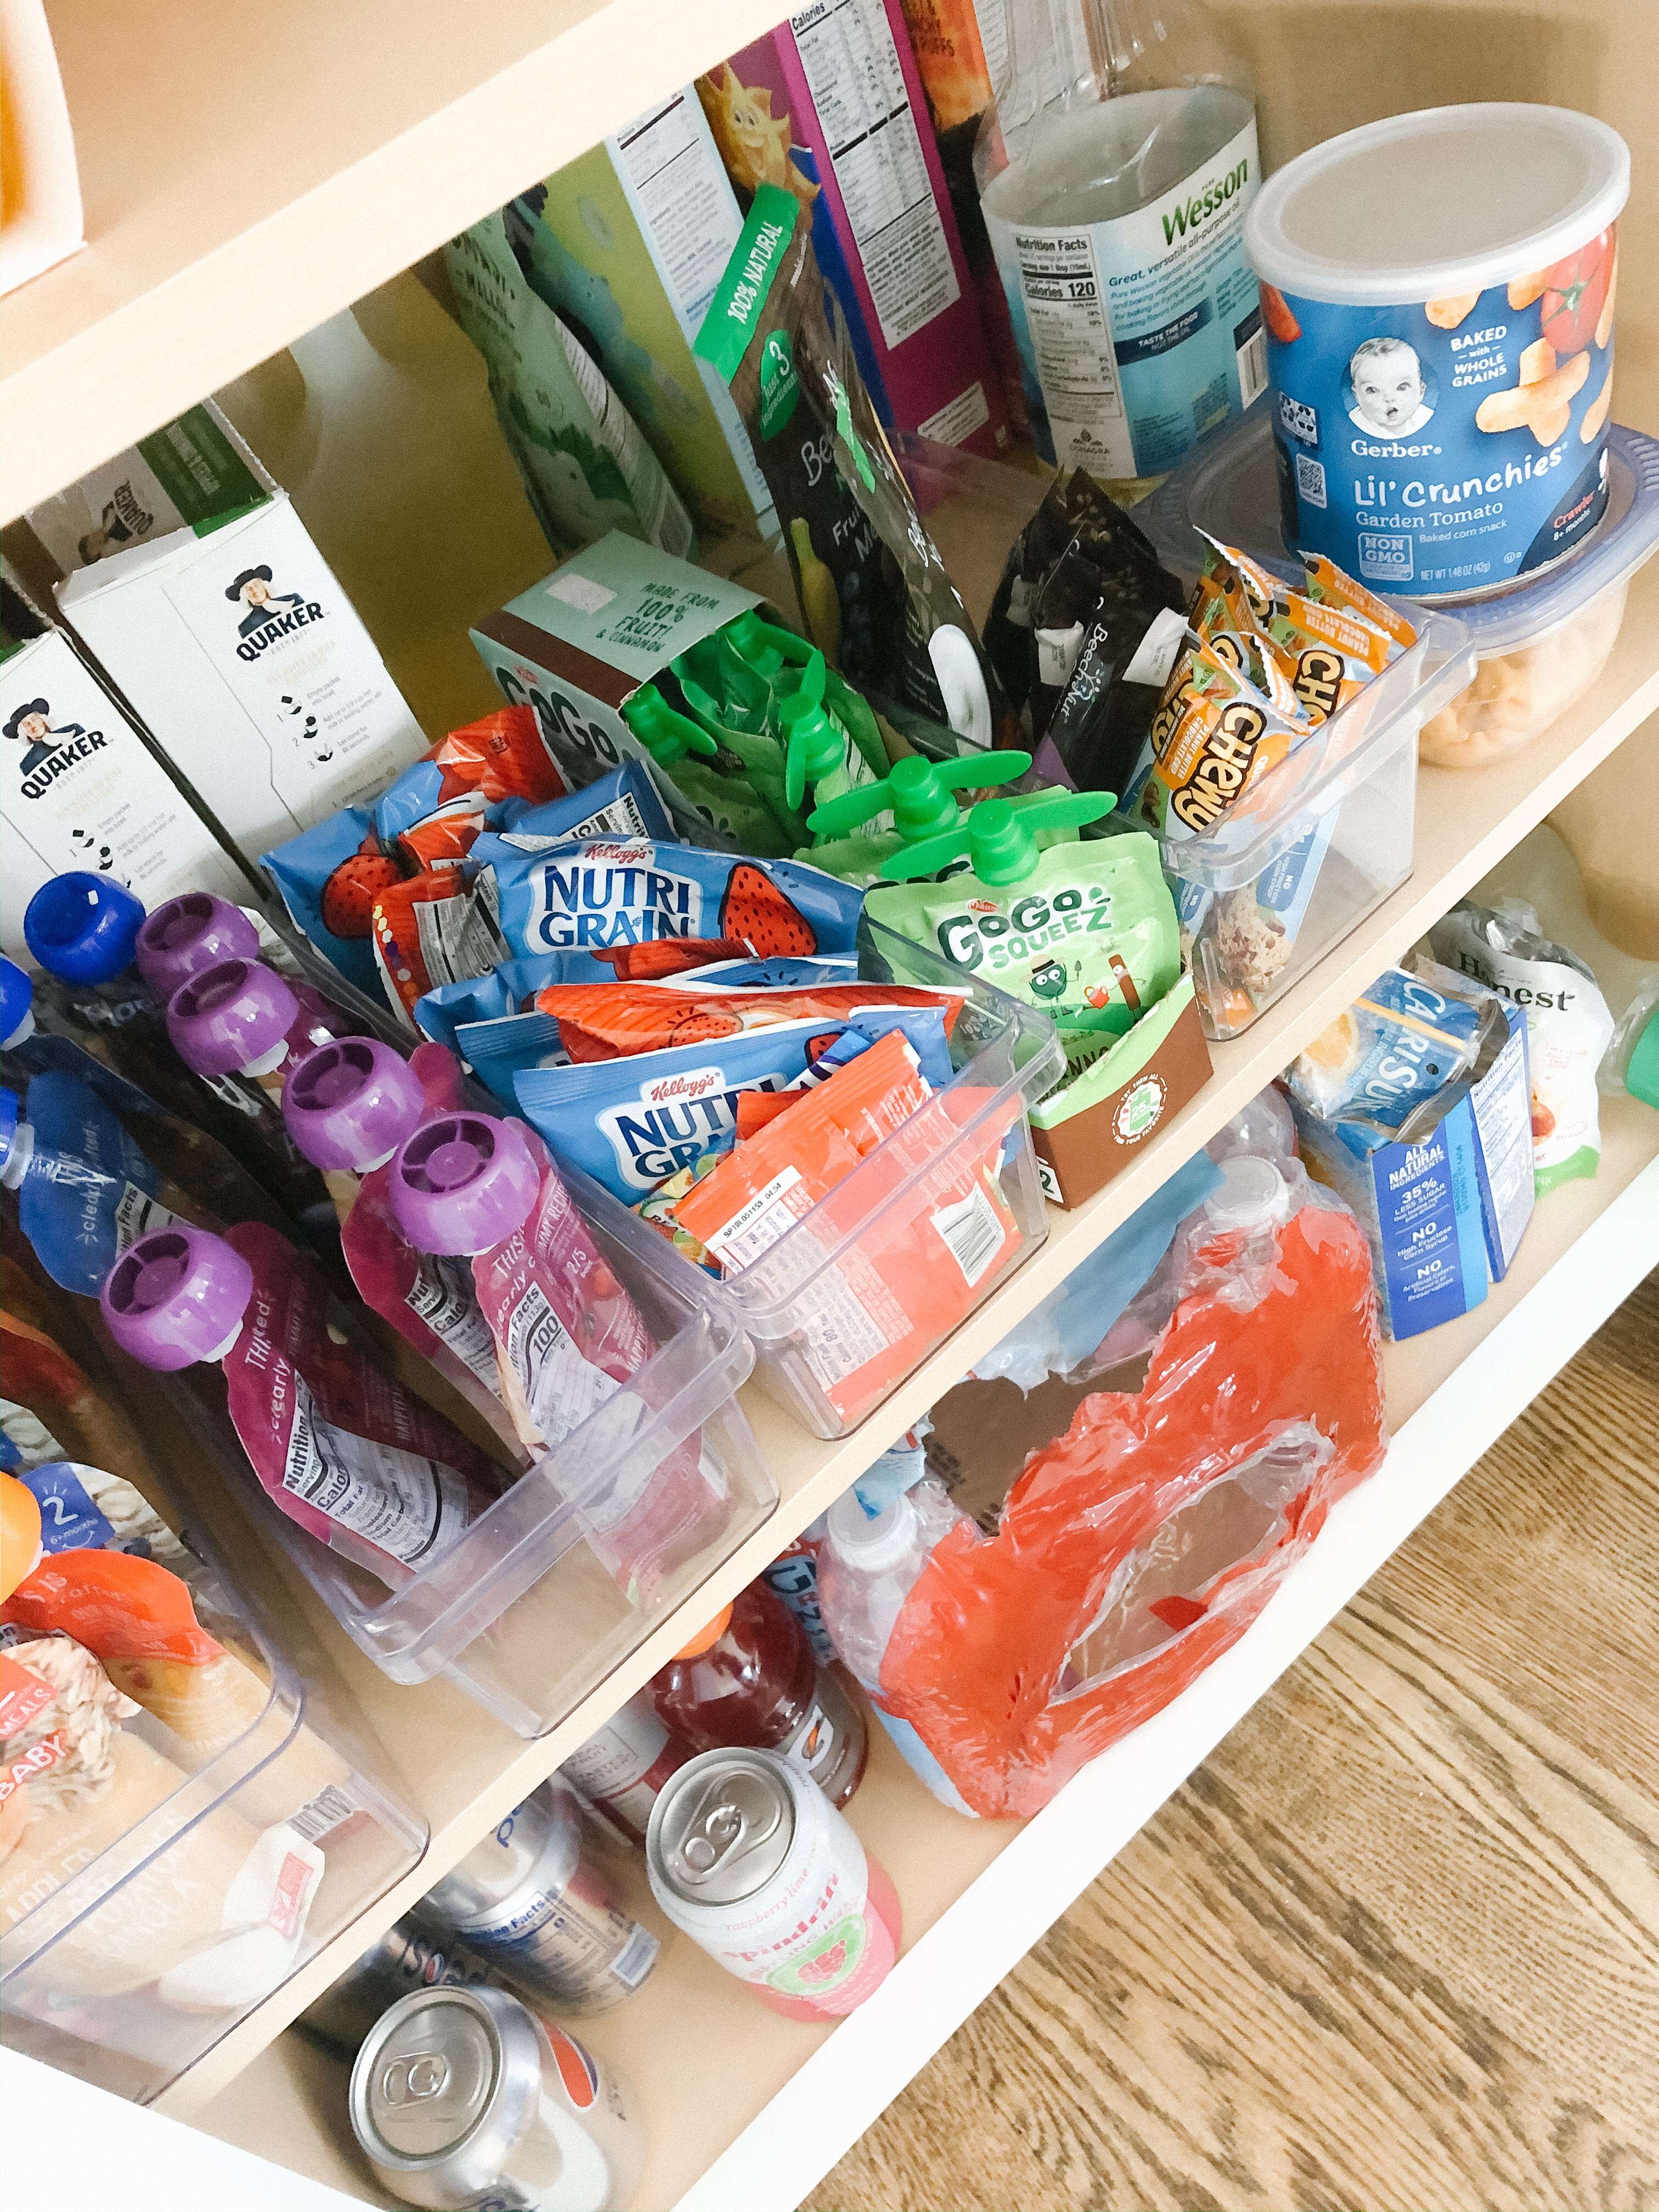 Snack cabinet all set up, with the toddler's snacks within their reach  (bottom shelf not pictured is surplus) : r/organization